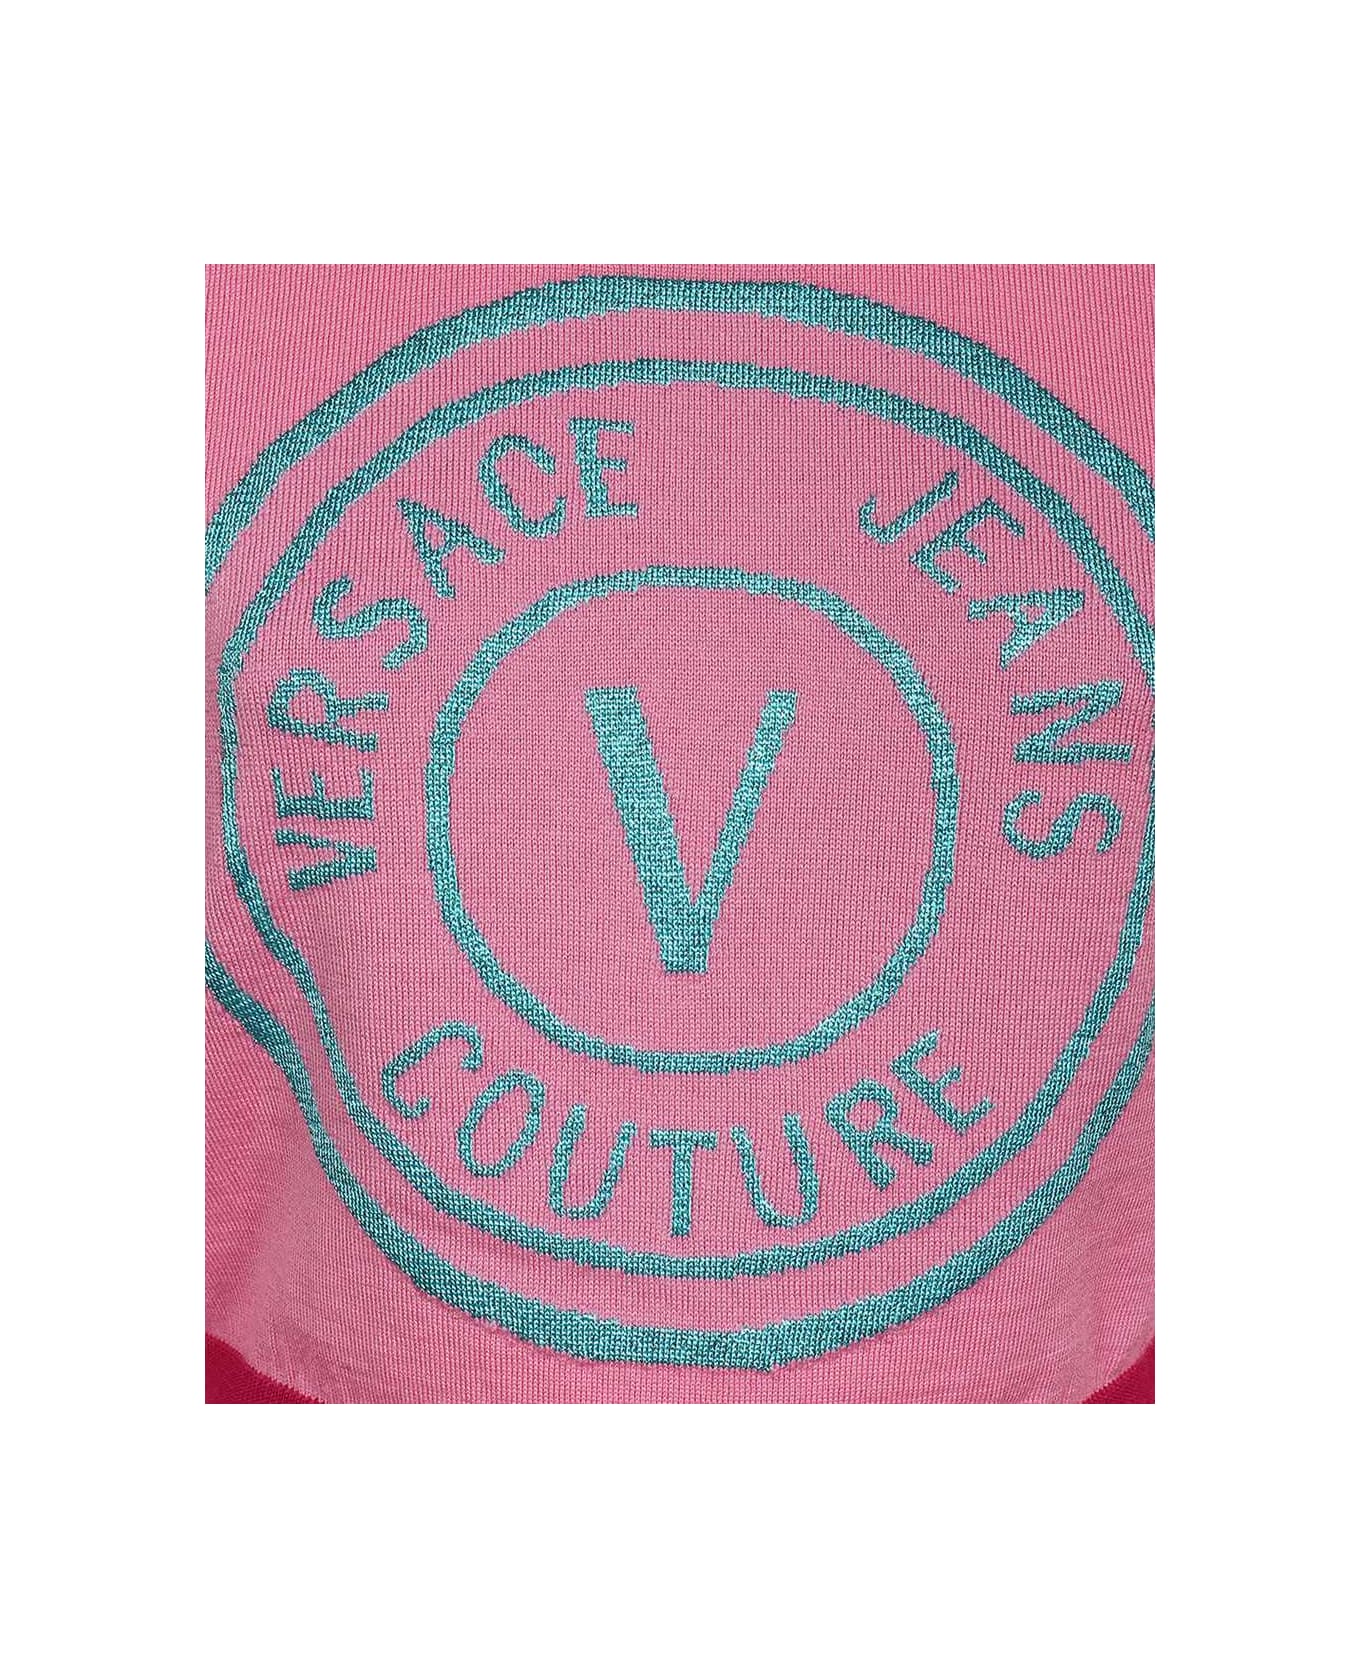 Versace Jeans Couture Crew-neck Wool Sweater - Pink ニットウェア